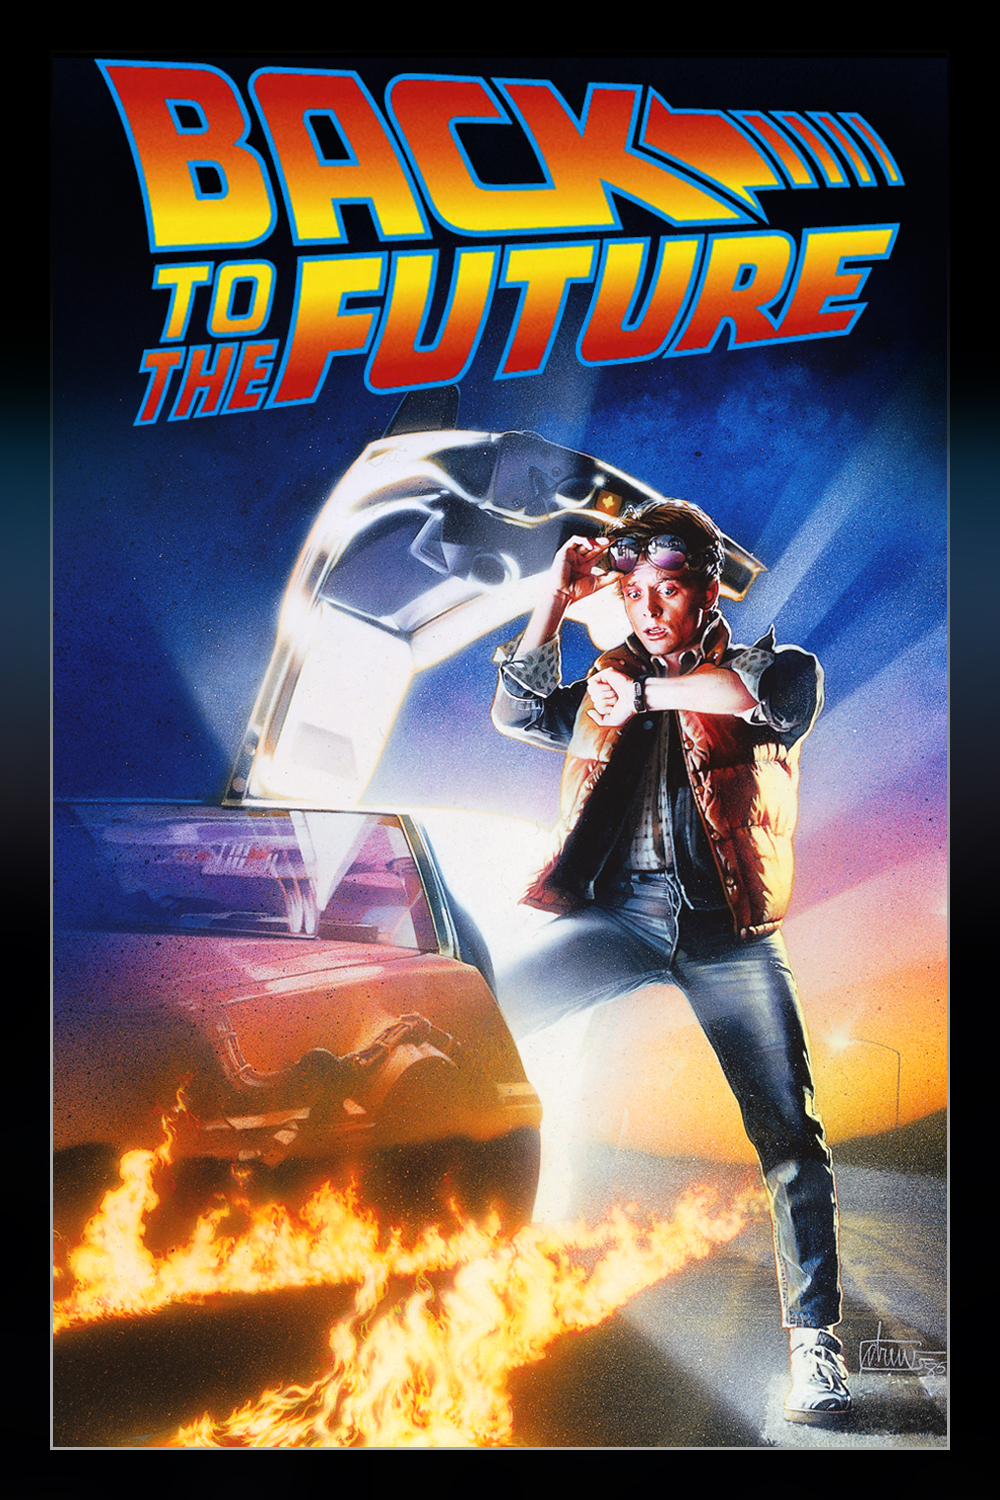 Throwback Thursday: Back to the Future